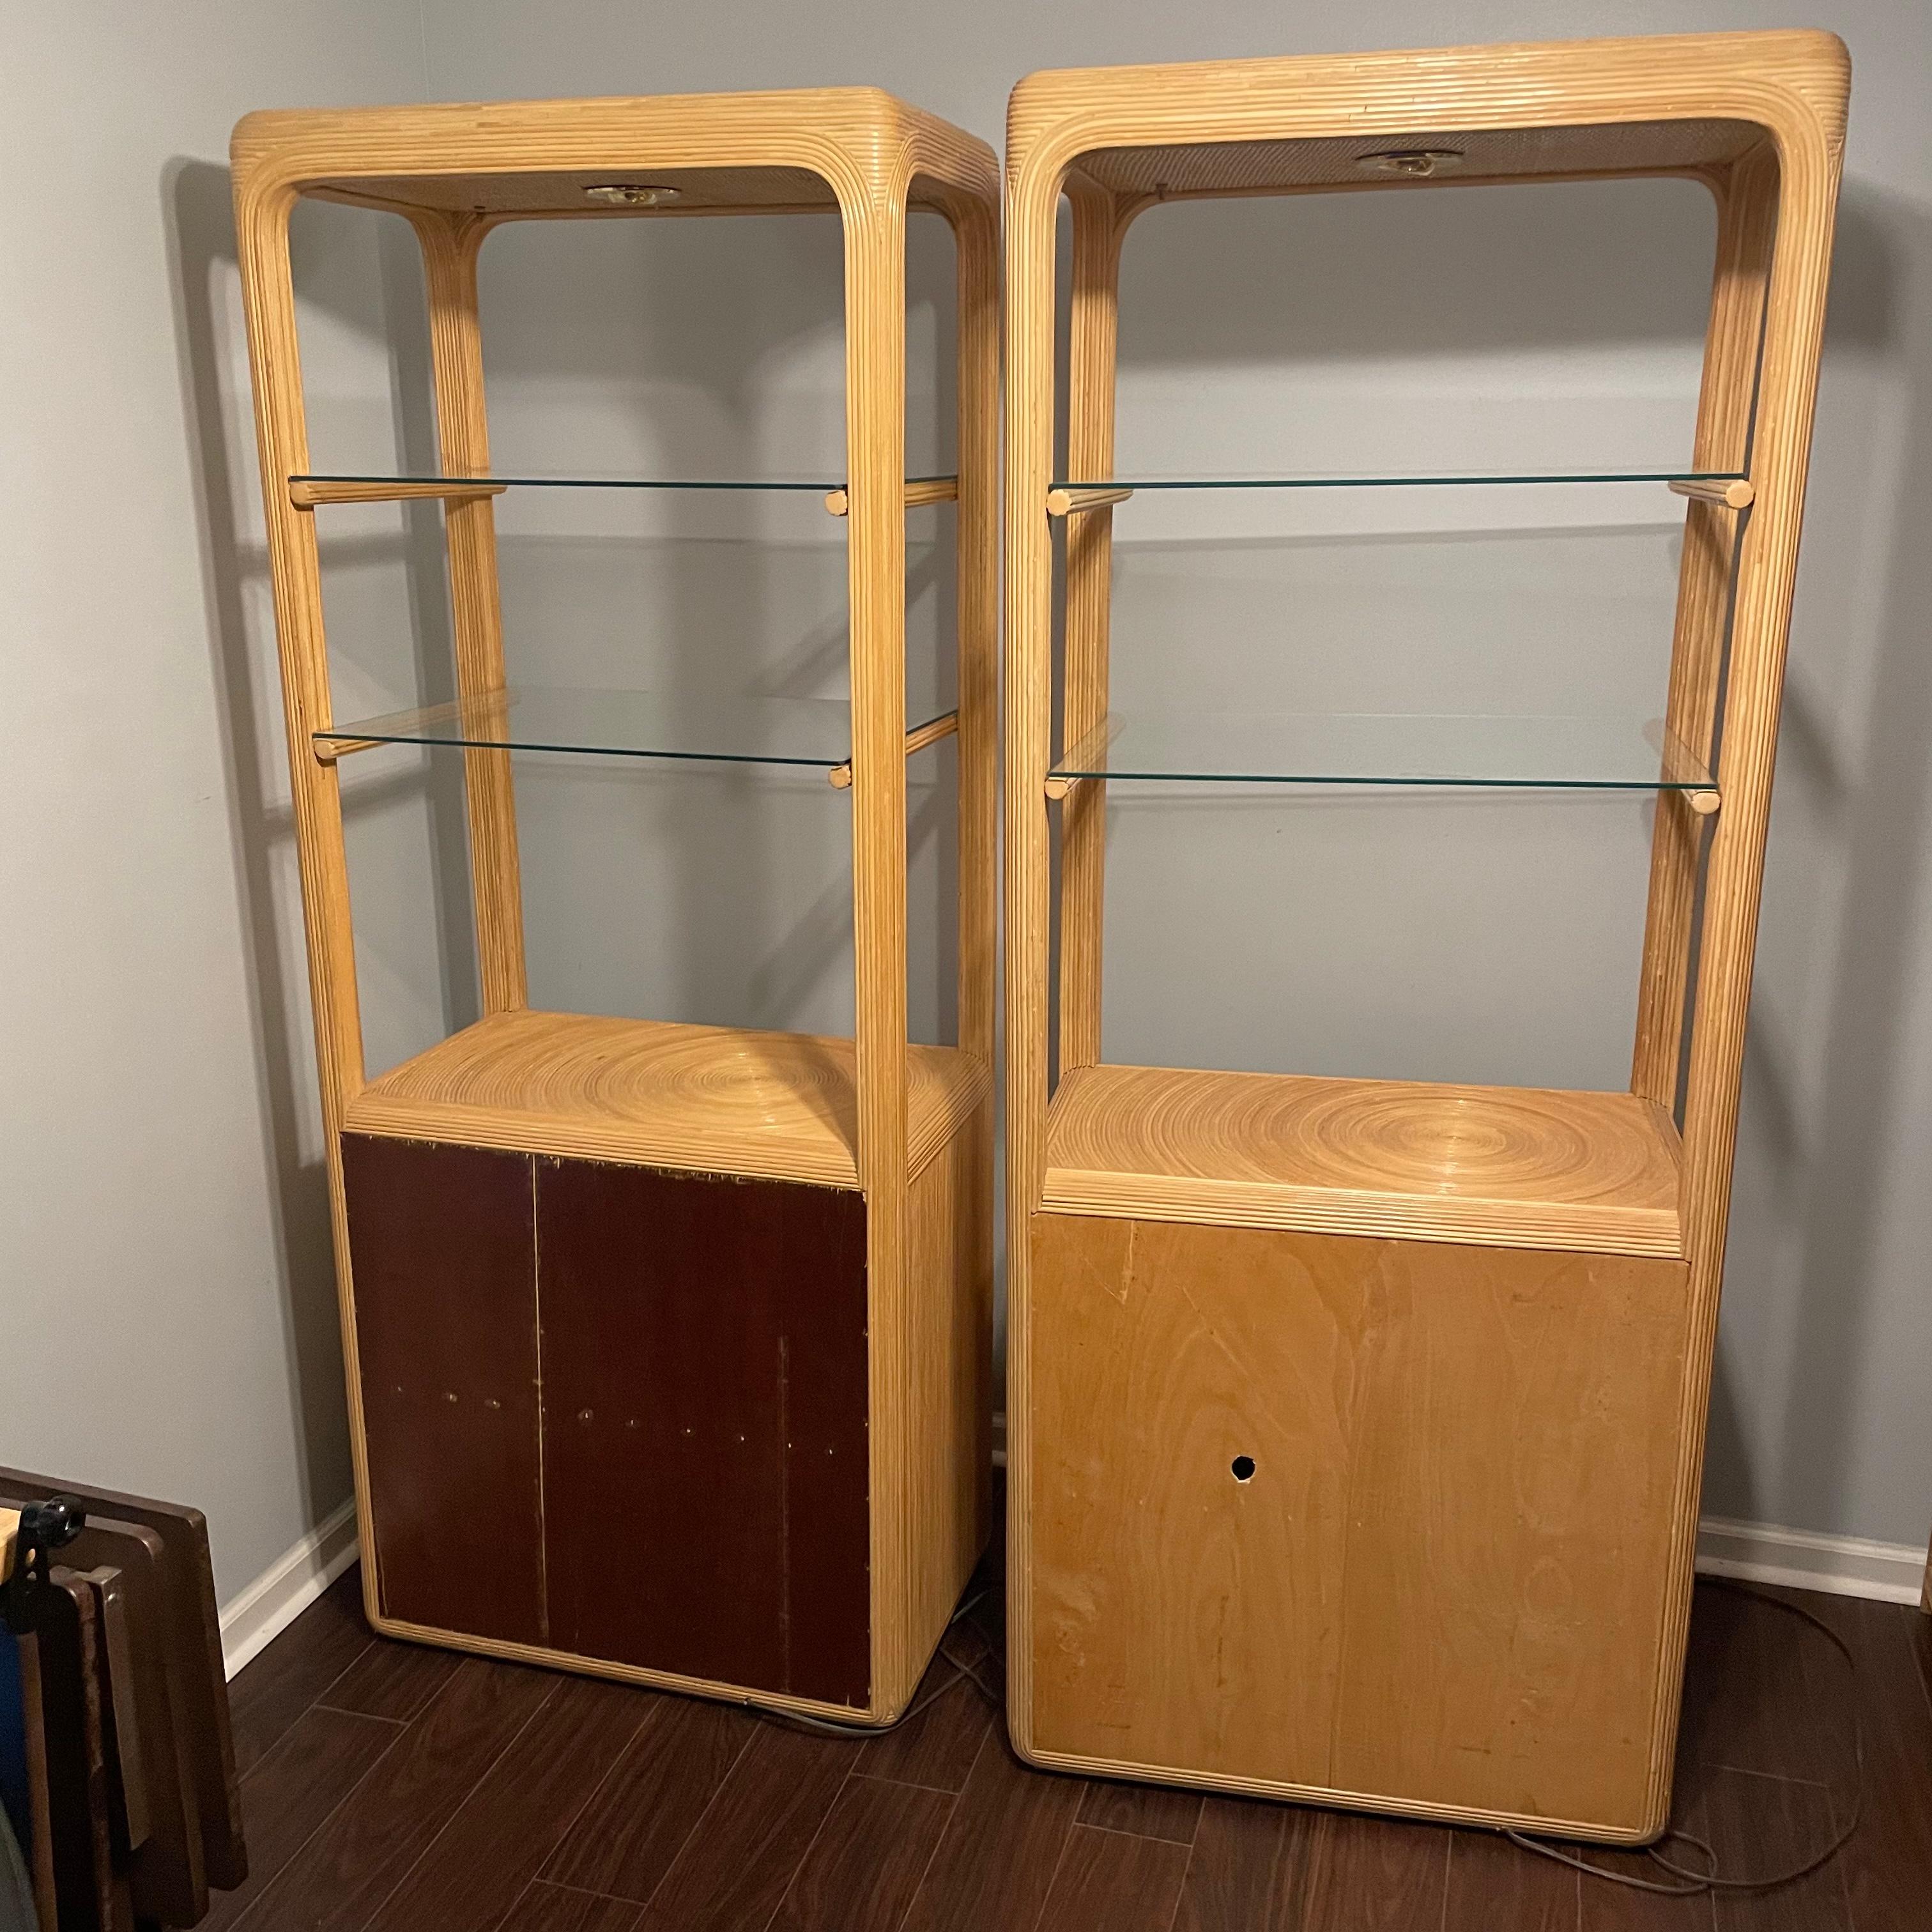 Pair of vintage 1970s etageres / cabinets with a spotlight in the top and two glass shelves below the light. Behind the double doors are two shelves. These are both in good condition for their age. The two glass shelves are removable for easy and